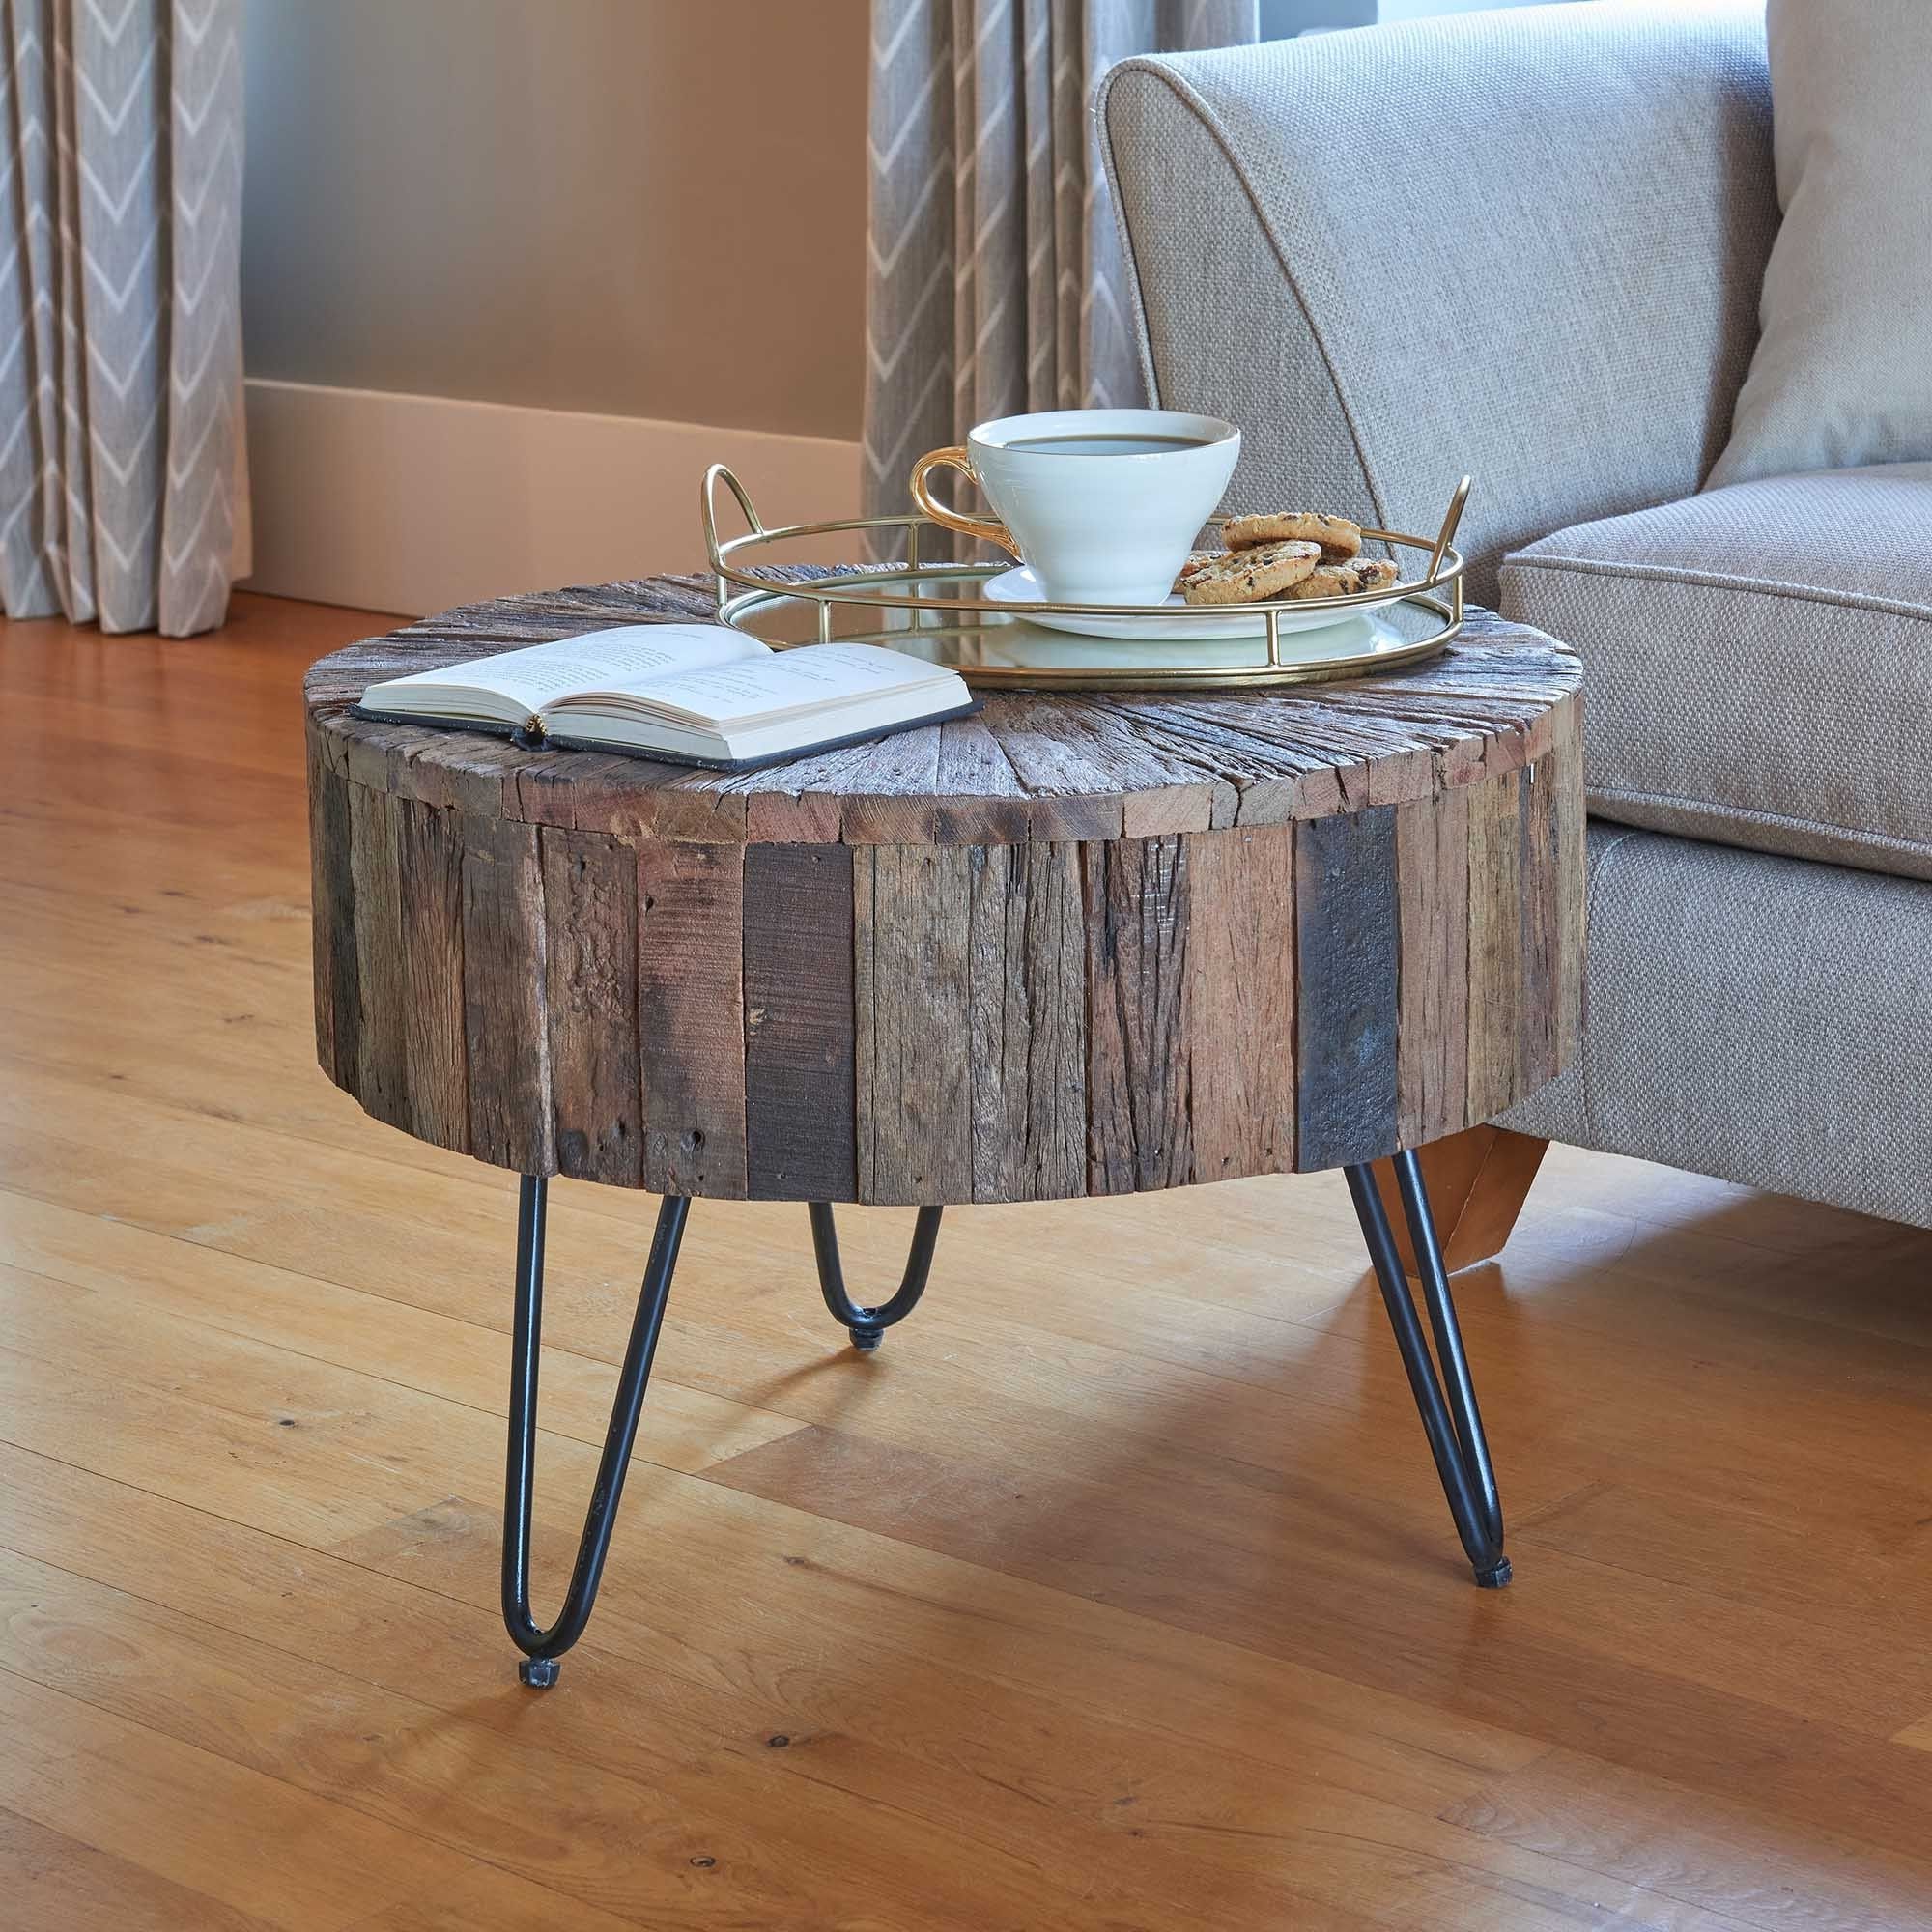 2019 Natural Mango Wood Coffee Tables Intended For Round Mango Wood Coffee Table (Gallery 14 of 20)